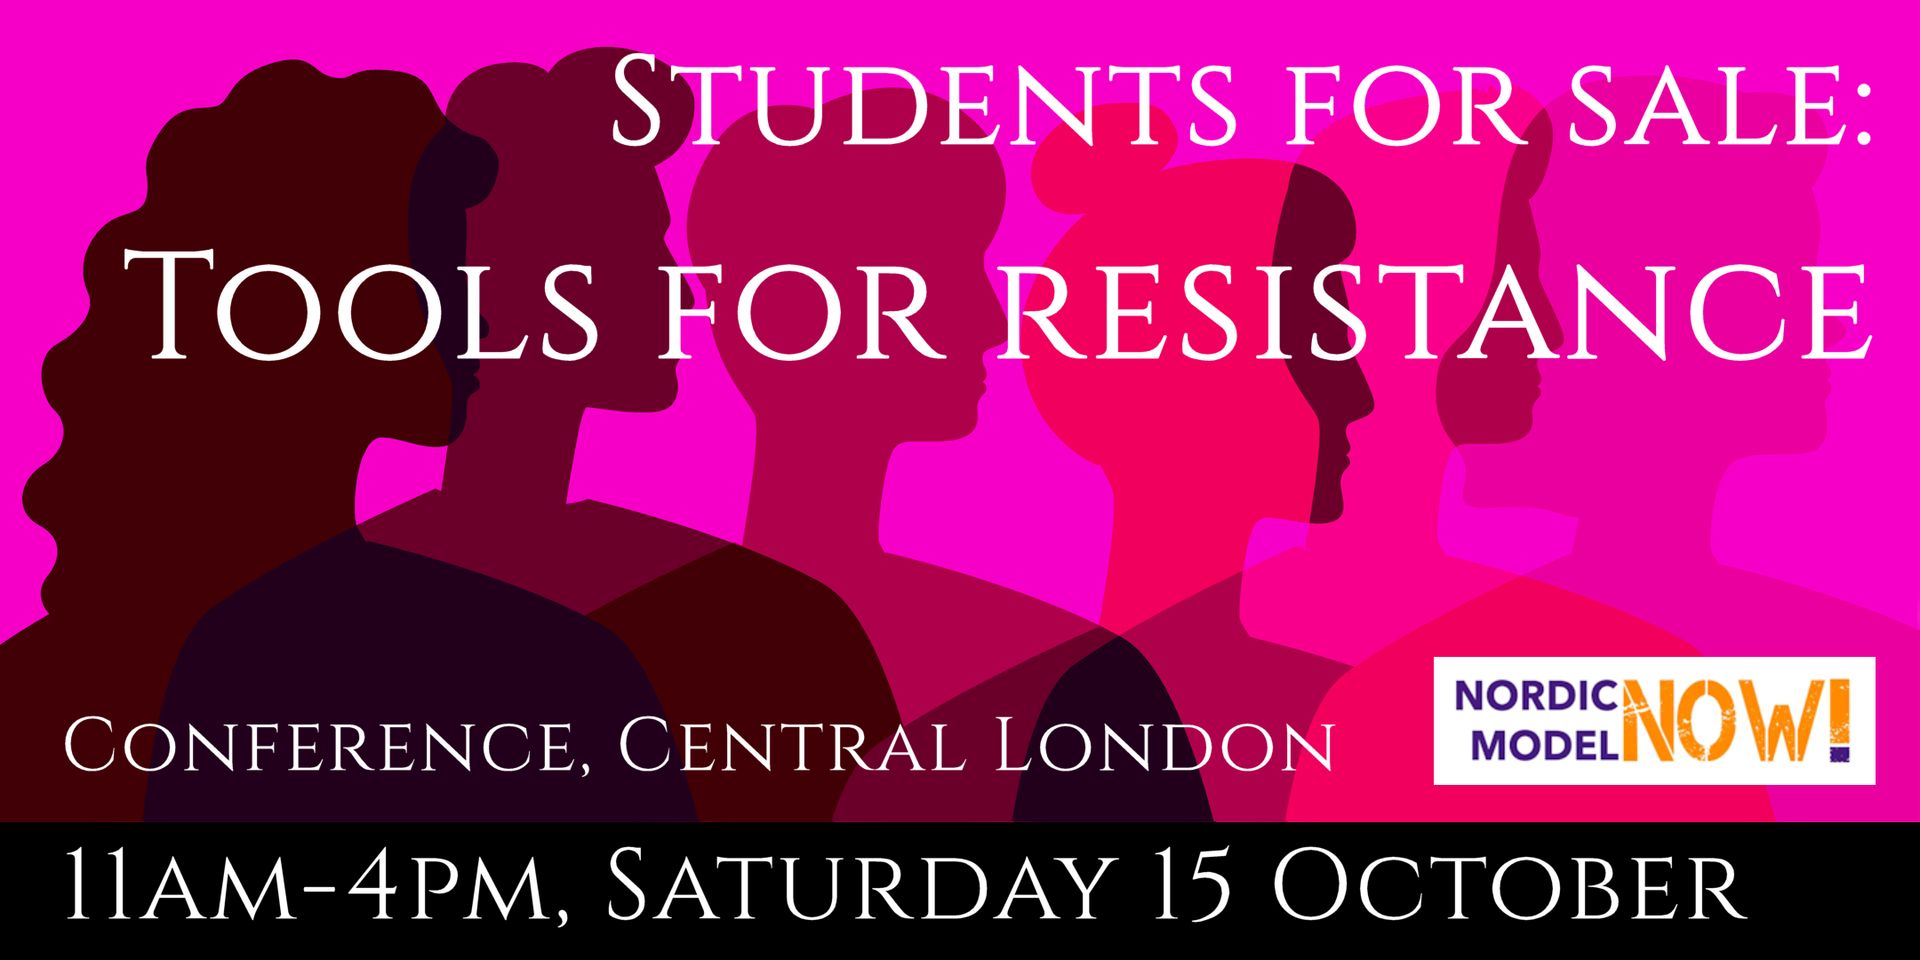 Students for sale: Tools for resistance, Greater London, England, United Kingdom